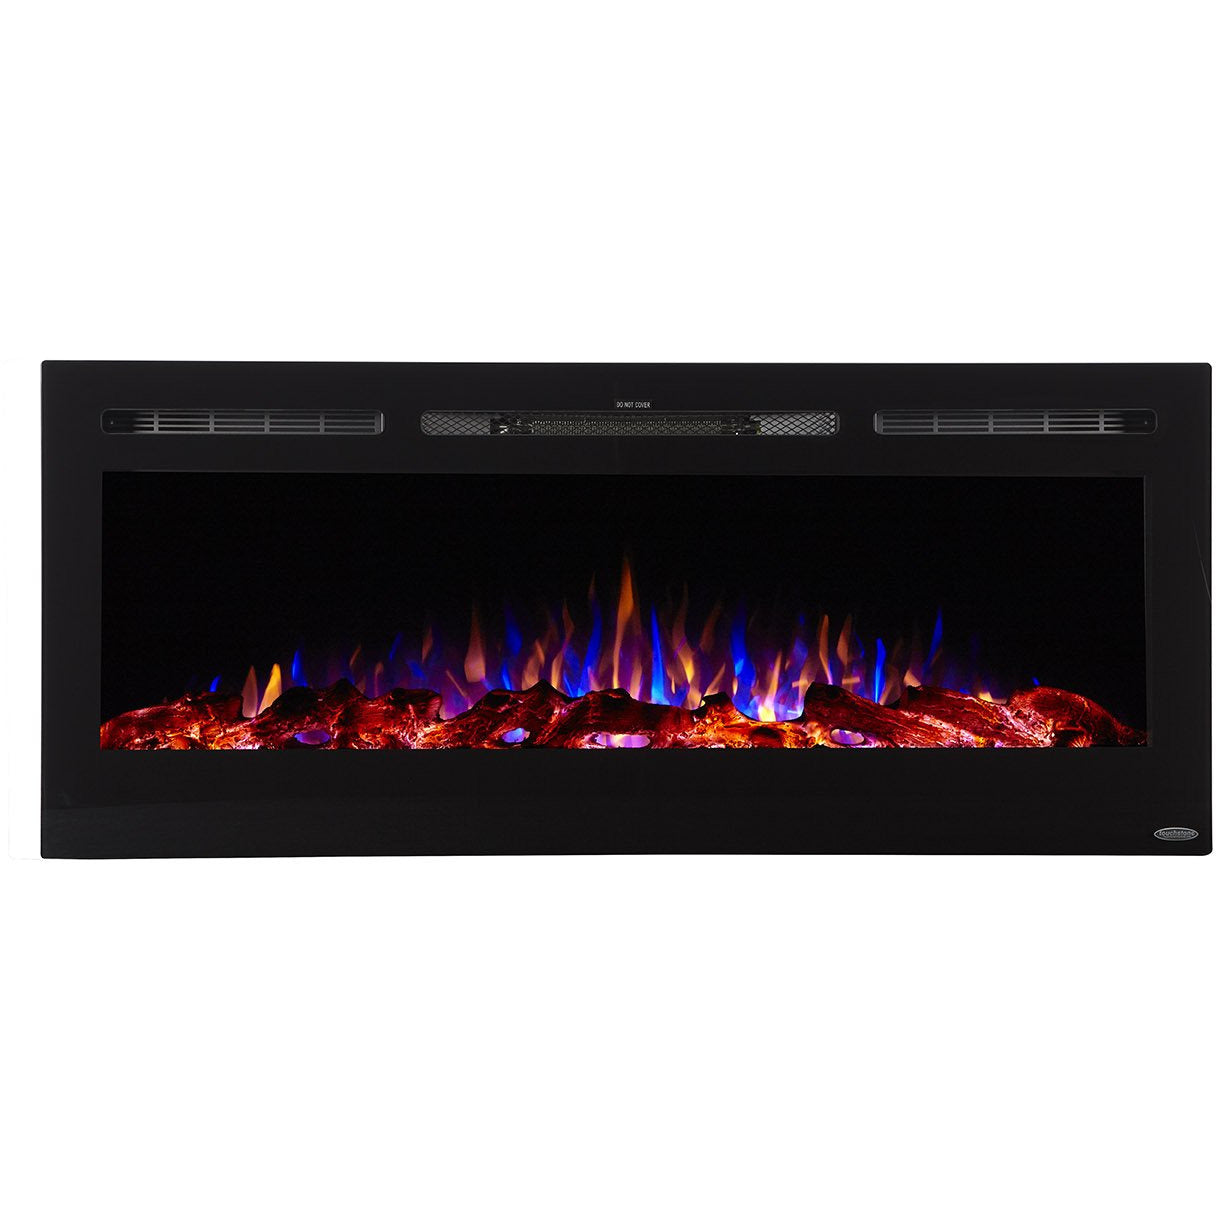 Touchstone Sideline 50" Recessed Mounted Black Frame Electric Fireplace | Very Good Fireplaces